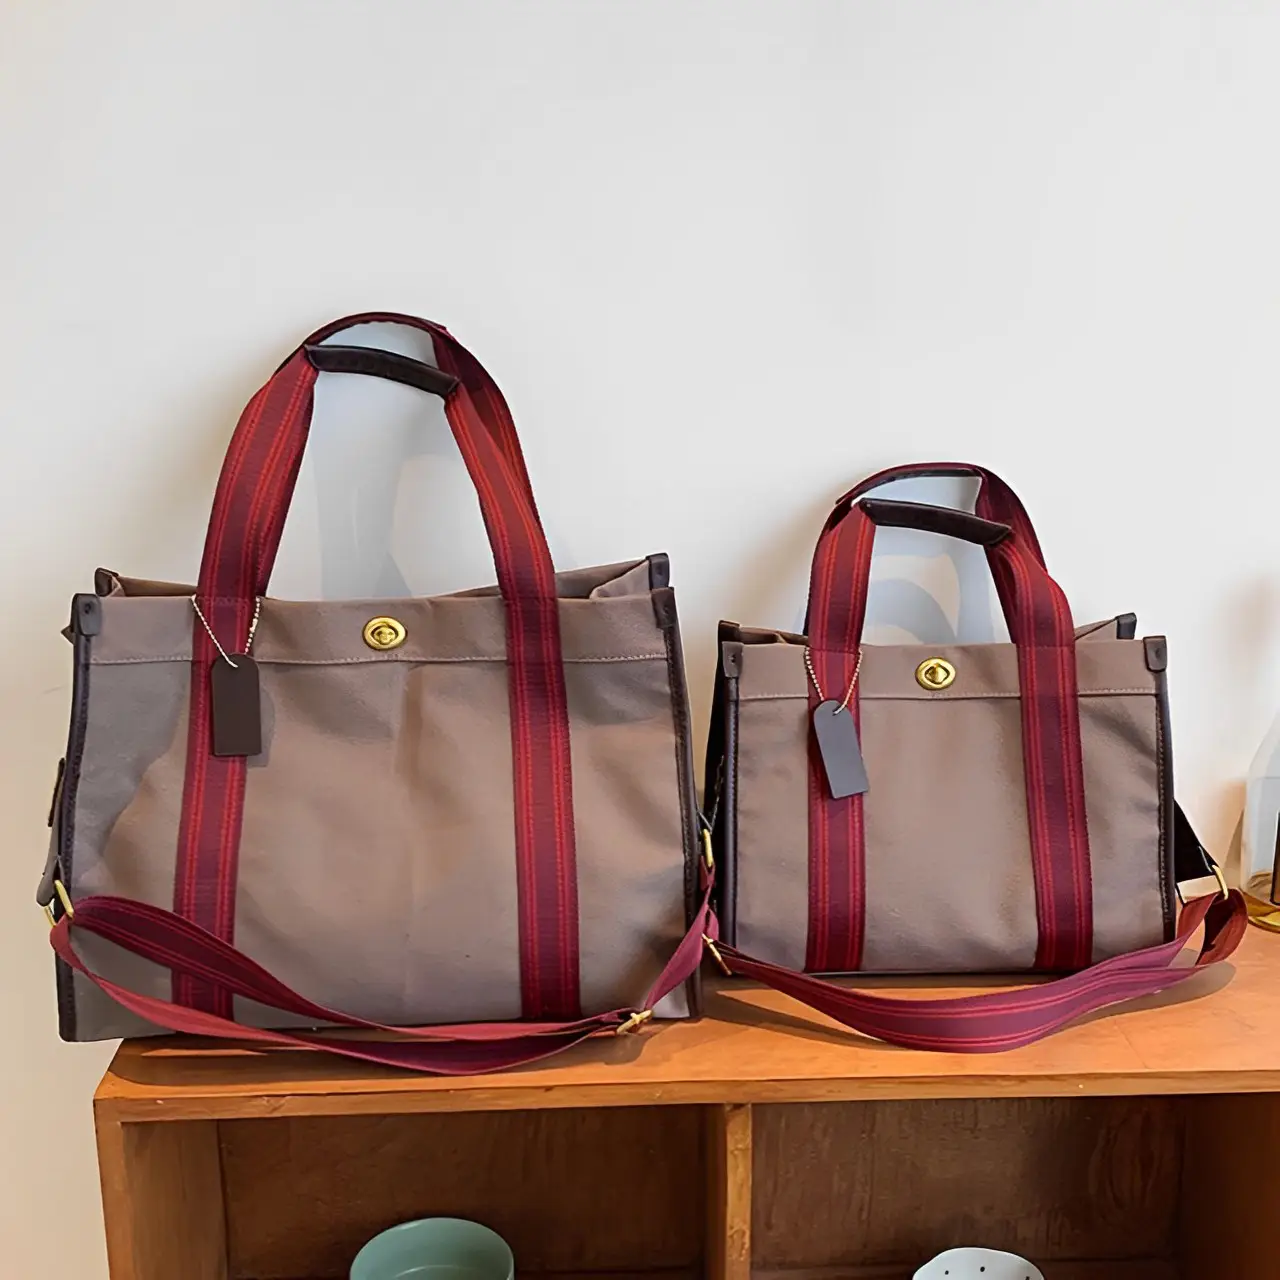 L.L. Bean Boat & Tote Sizing, Gallery posted by Allie Hoffberg